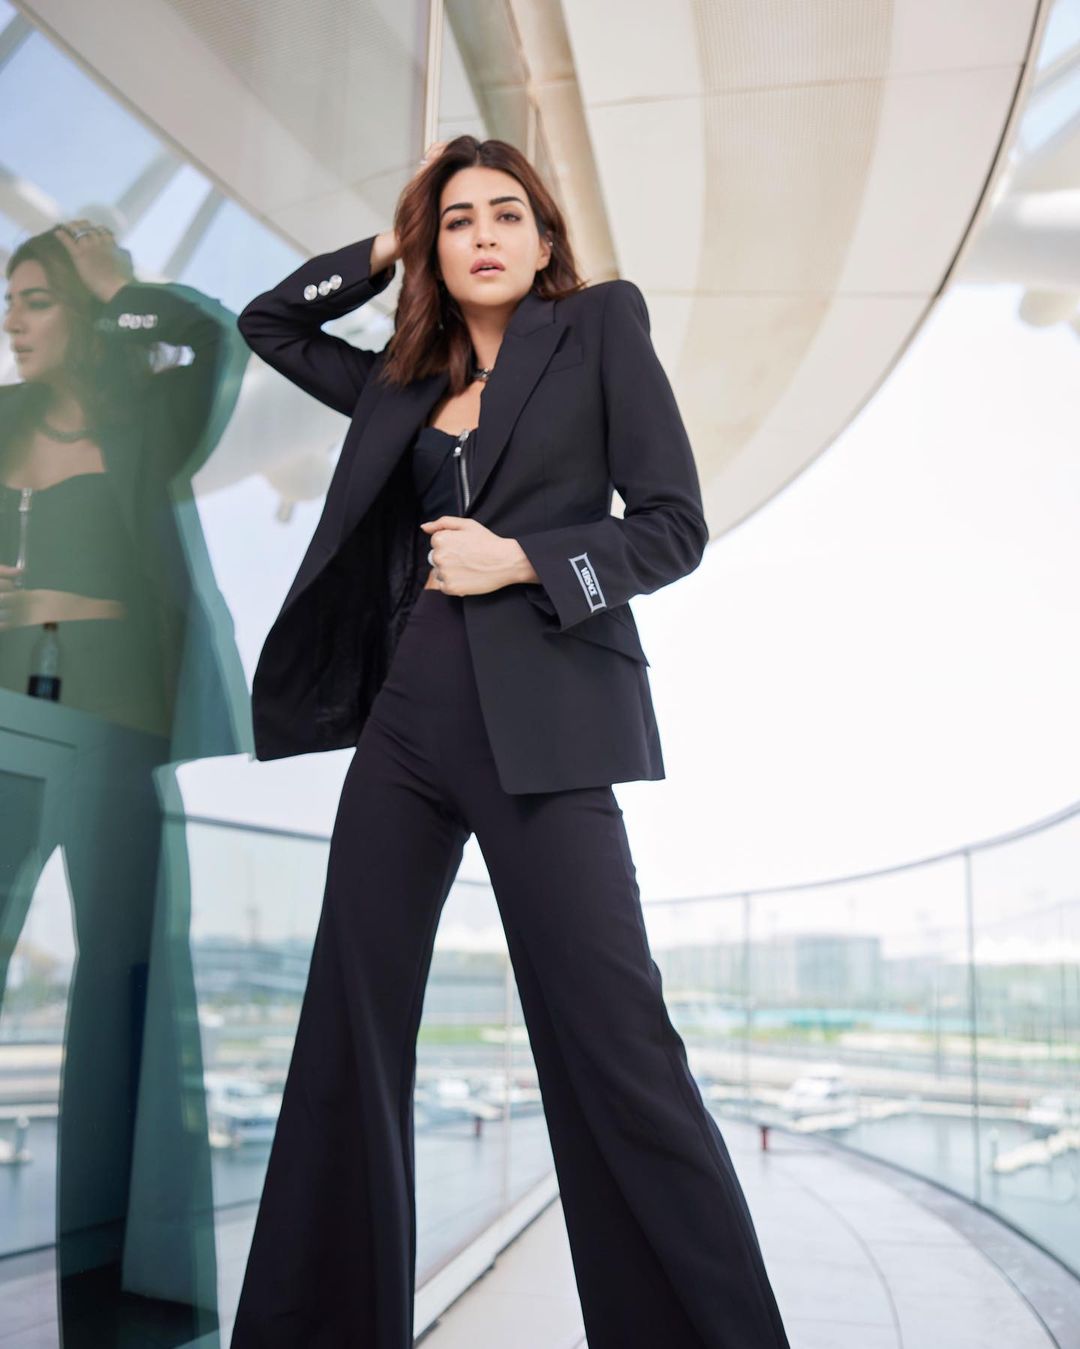 Kriti Sanon stuns with pant suit look, see photos 15740